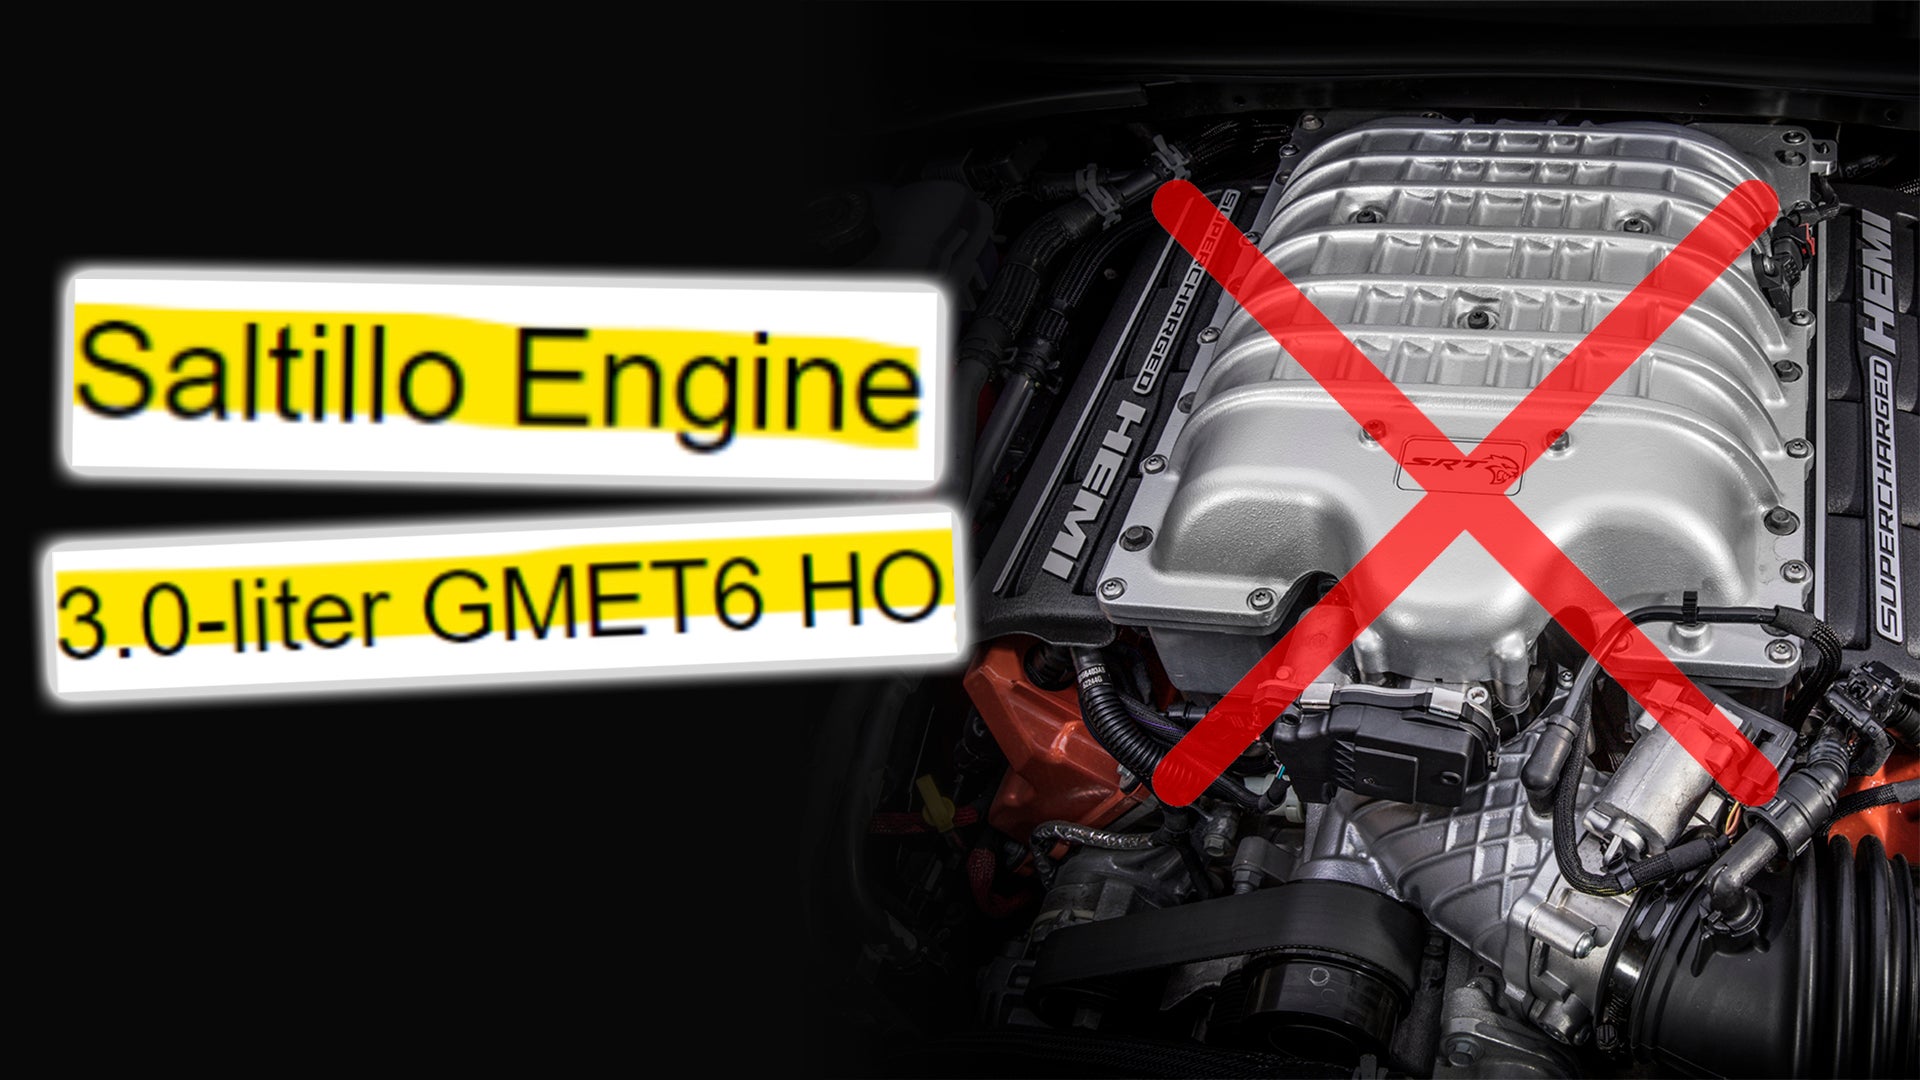 Inline-Six Replacement for Hemi V8s in Jeep, Dodge and Ram Models Almost Ready: Report